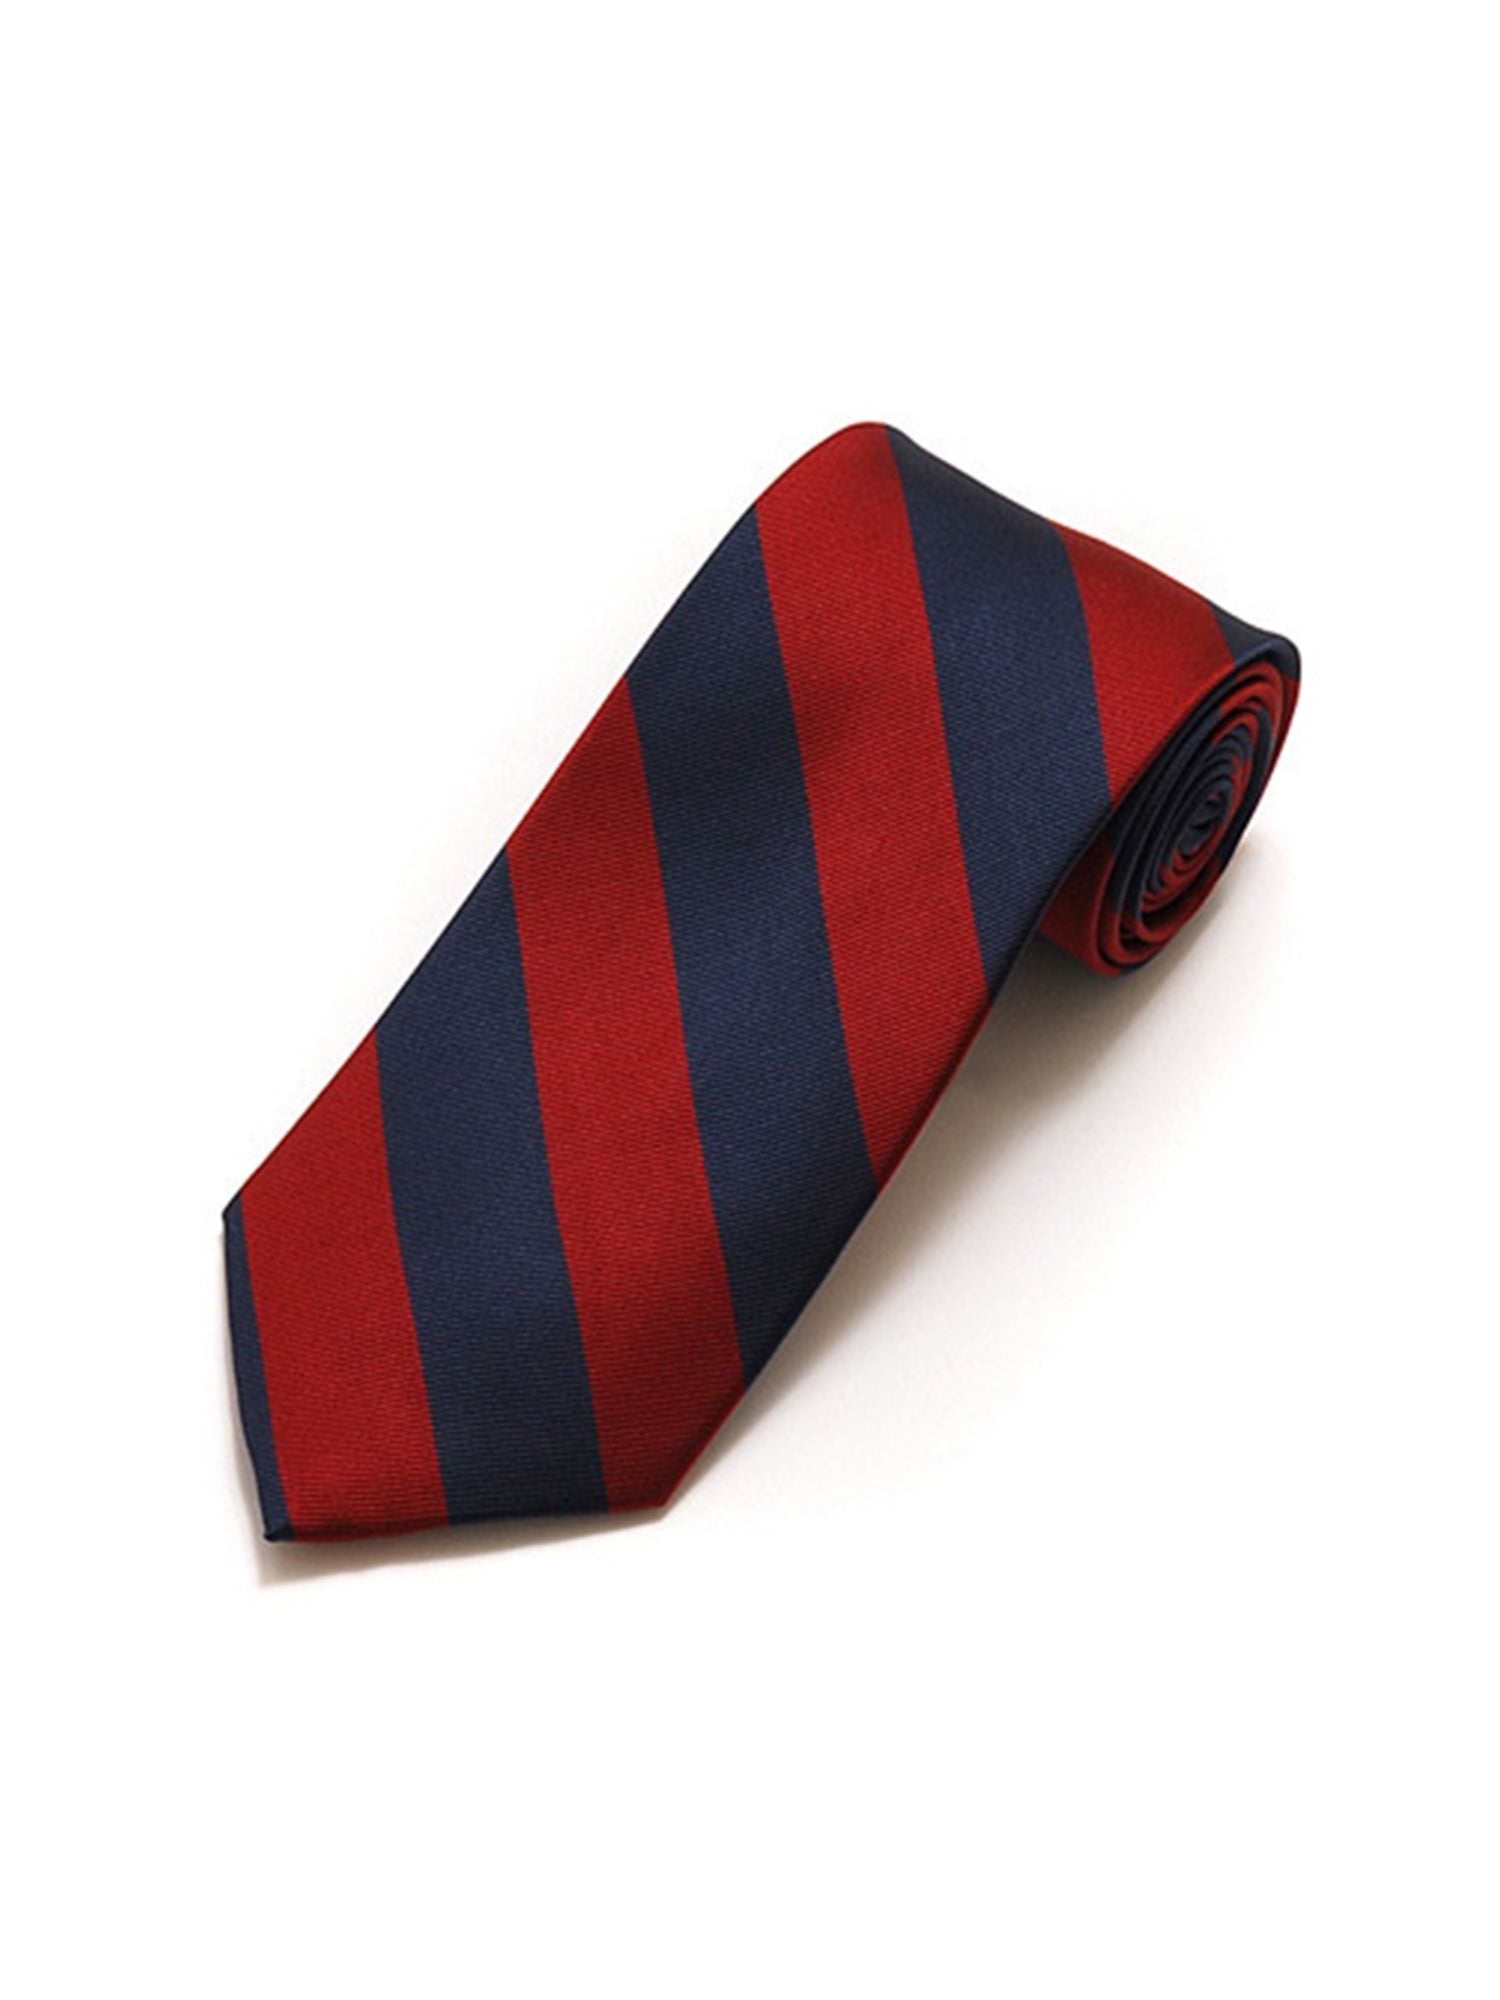 Men's College Striped Colored Silk Long Or X-Long Neck Tie Neck Tie TheDapperTie Burgundy & Navy 57" long & 3.25" wide 